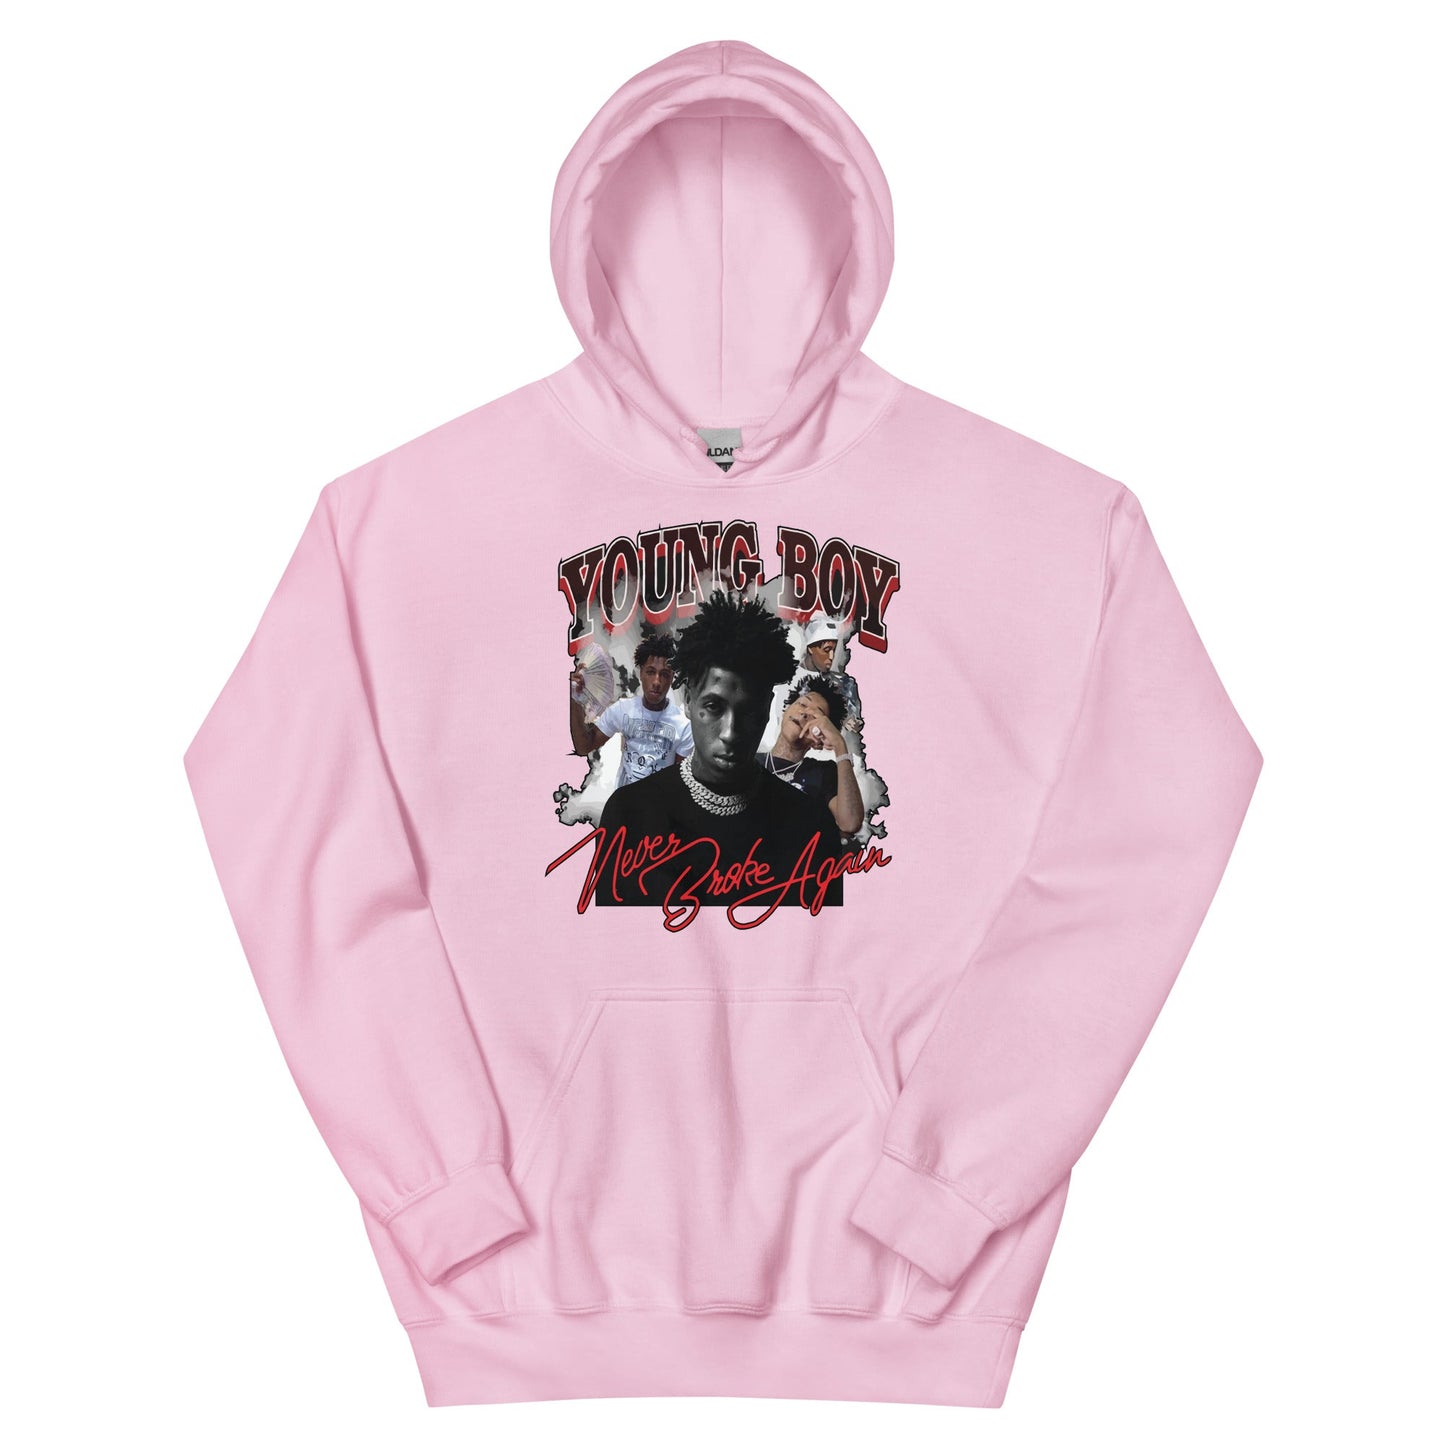 youngboy never broke again hoodie - The Truth Graphics